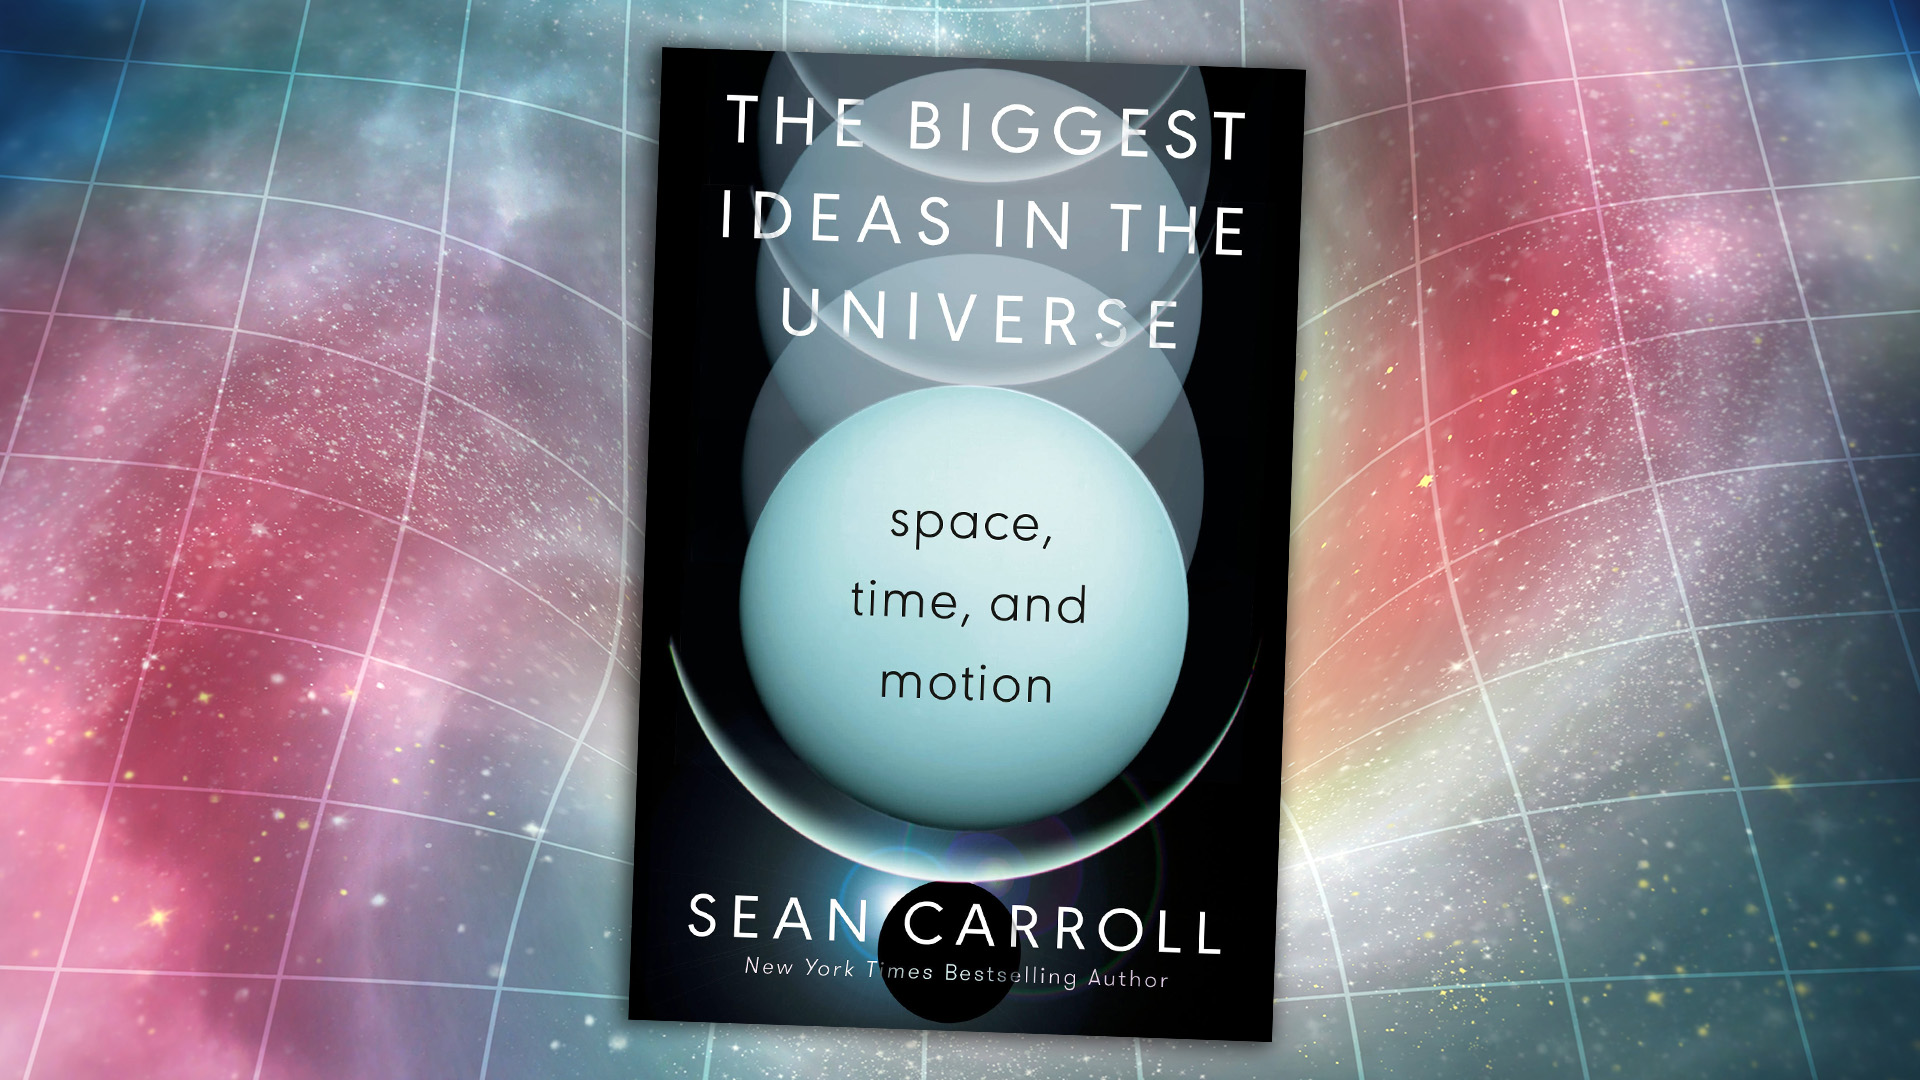 a book cover with a light blue planet at the center and various eclipses and overlays of other planets below and above the main planet. the text says "the biggest ideas in the universe: space, time, and motion, sean carroll, new york times bestseller"